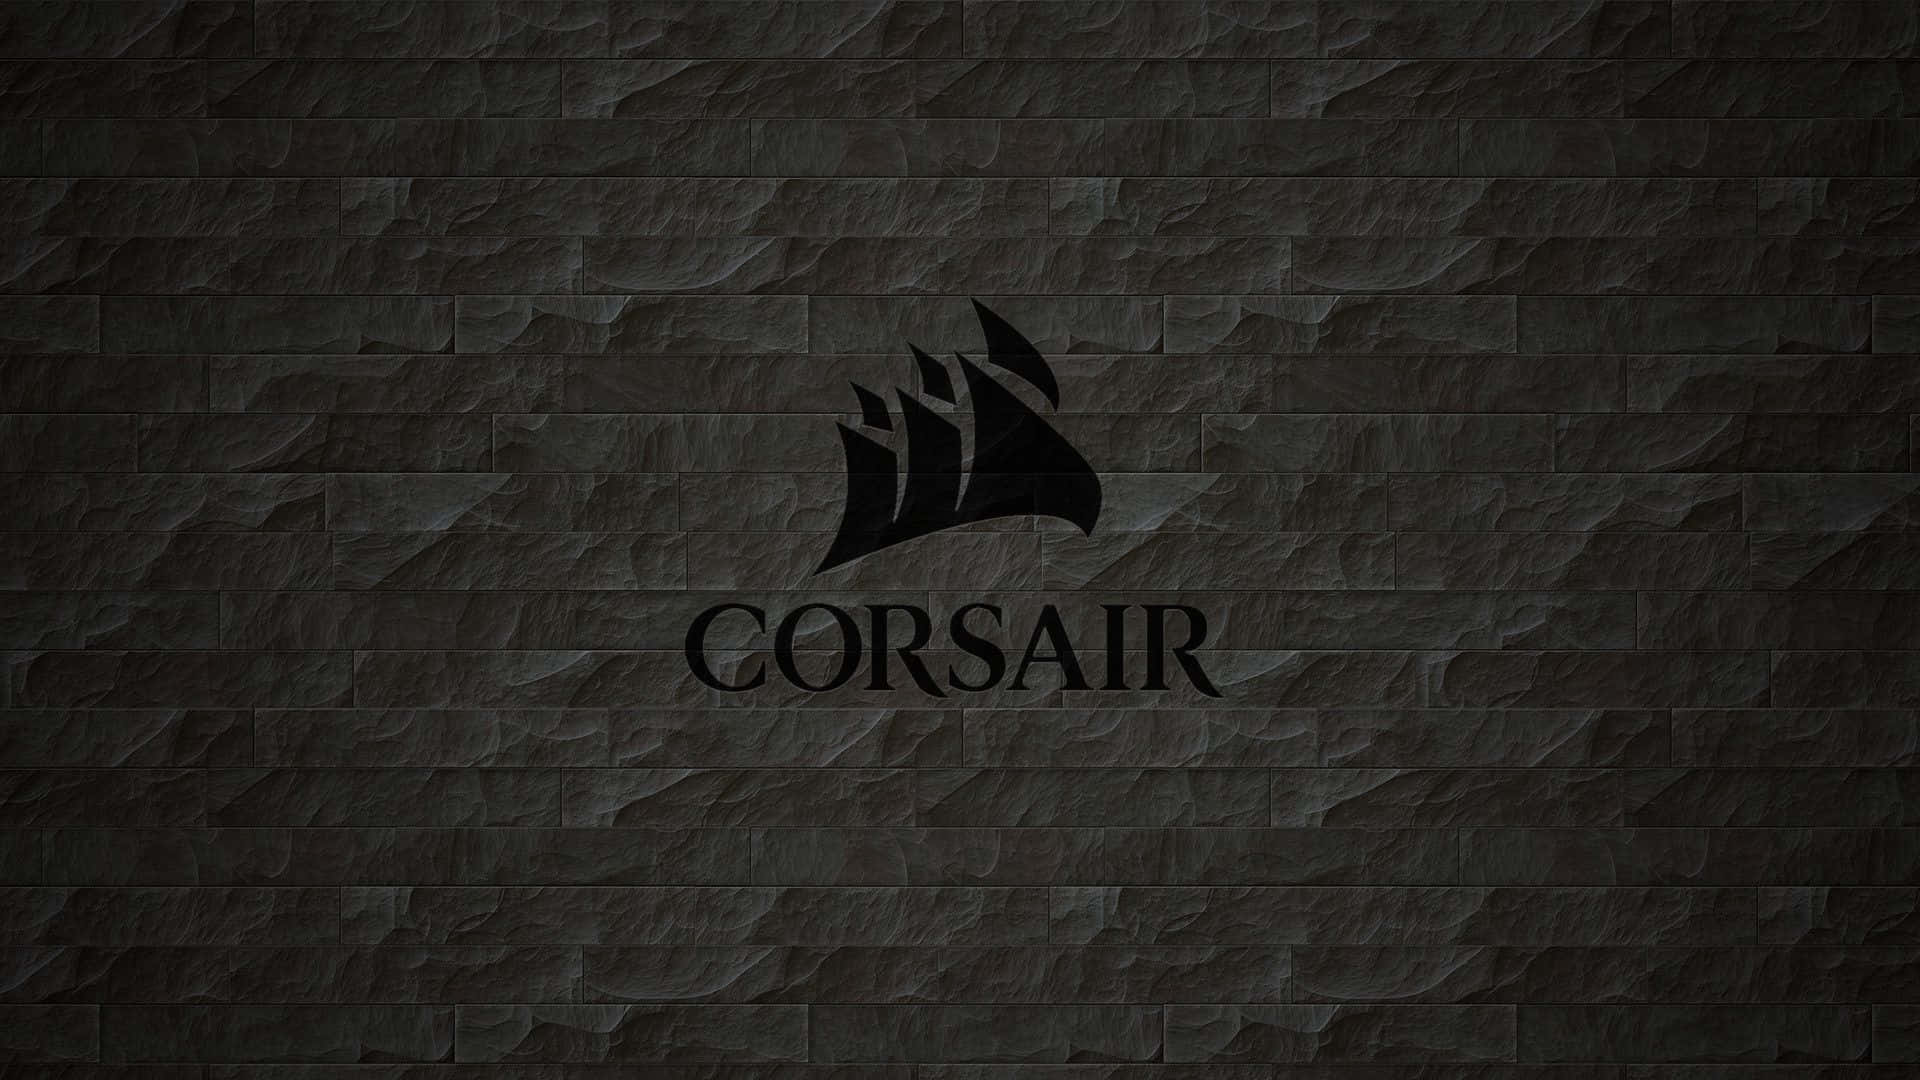 : Experience Adrenaline-Fueled Action with Corsair